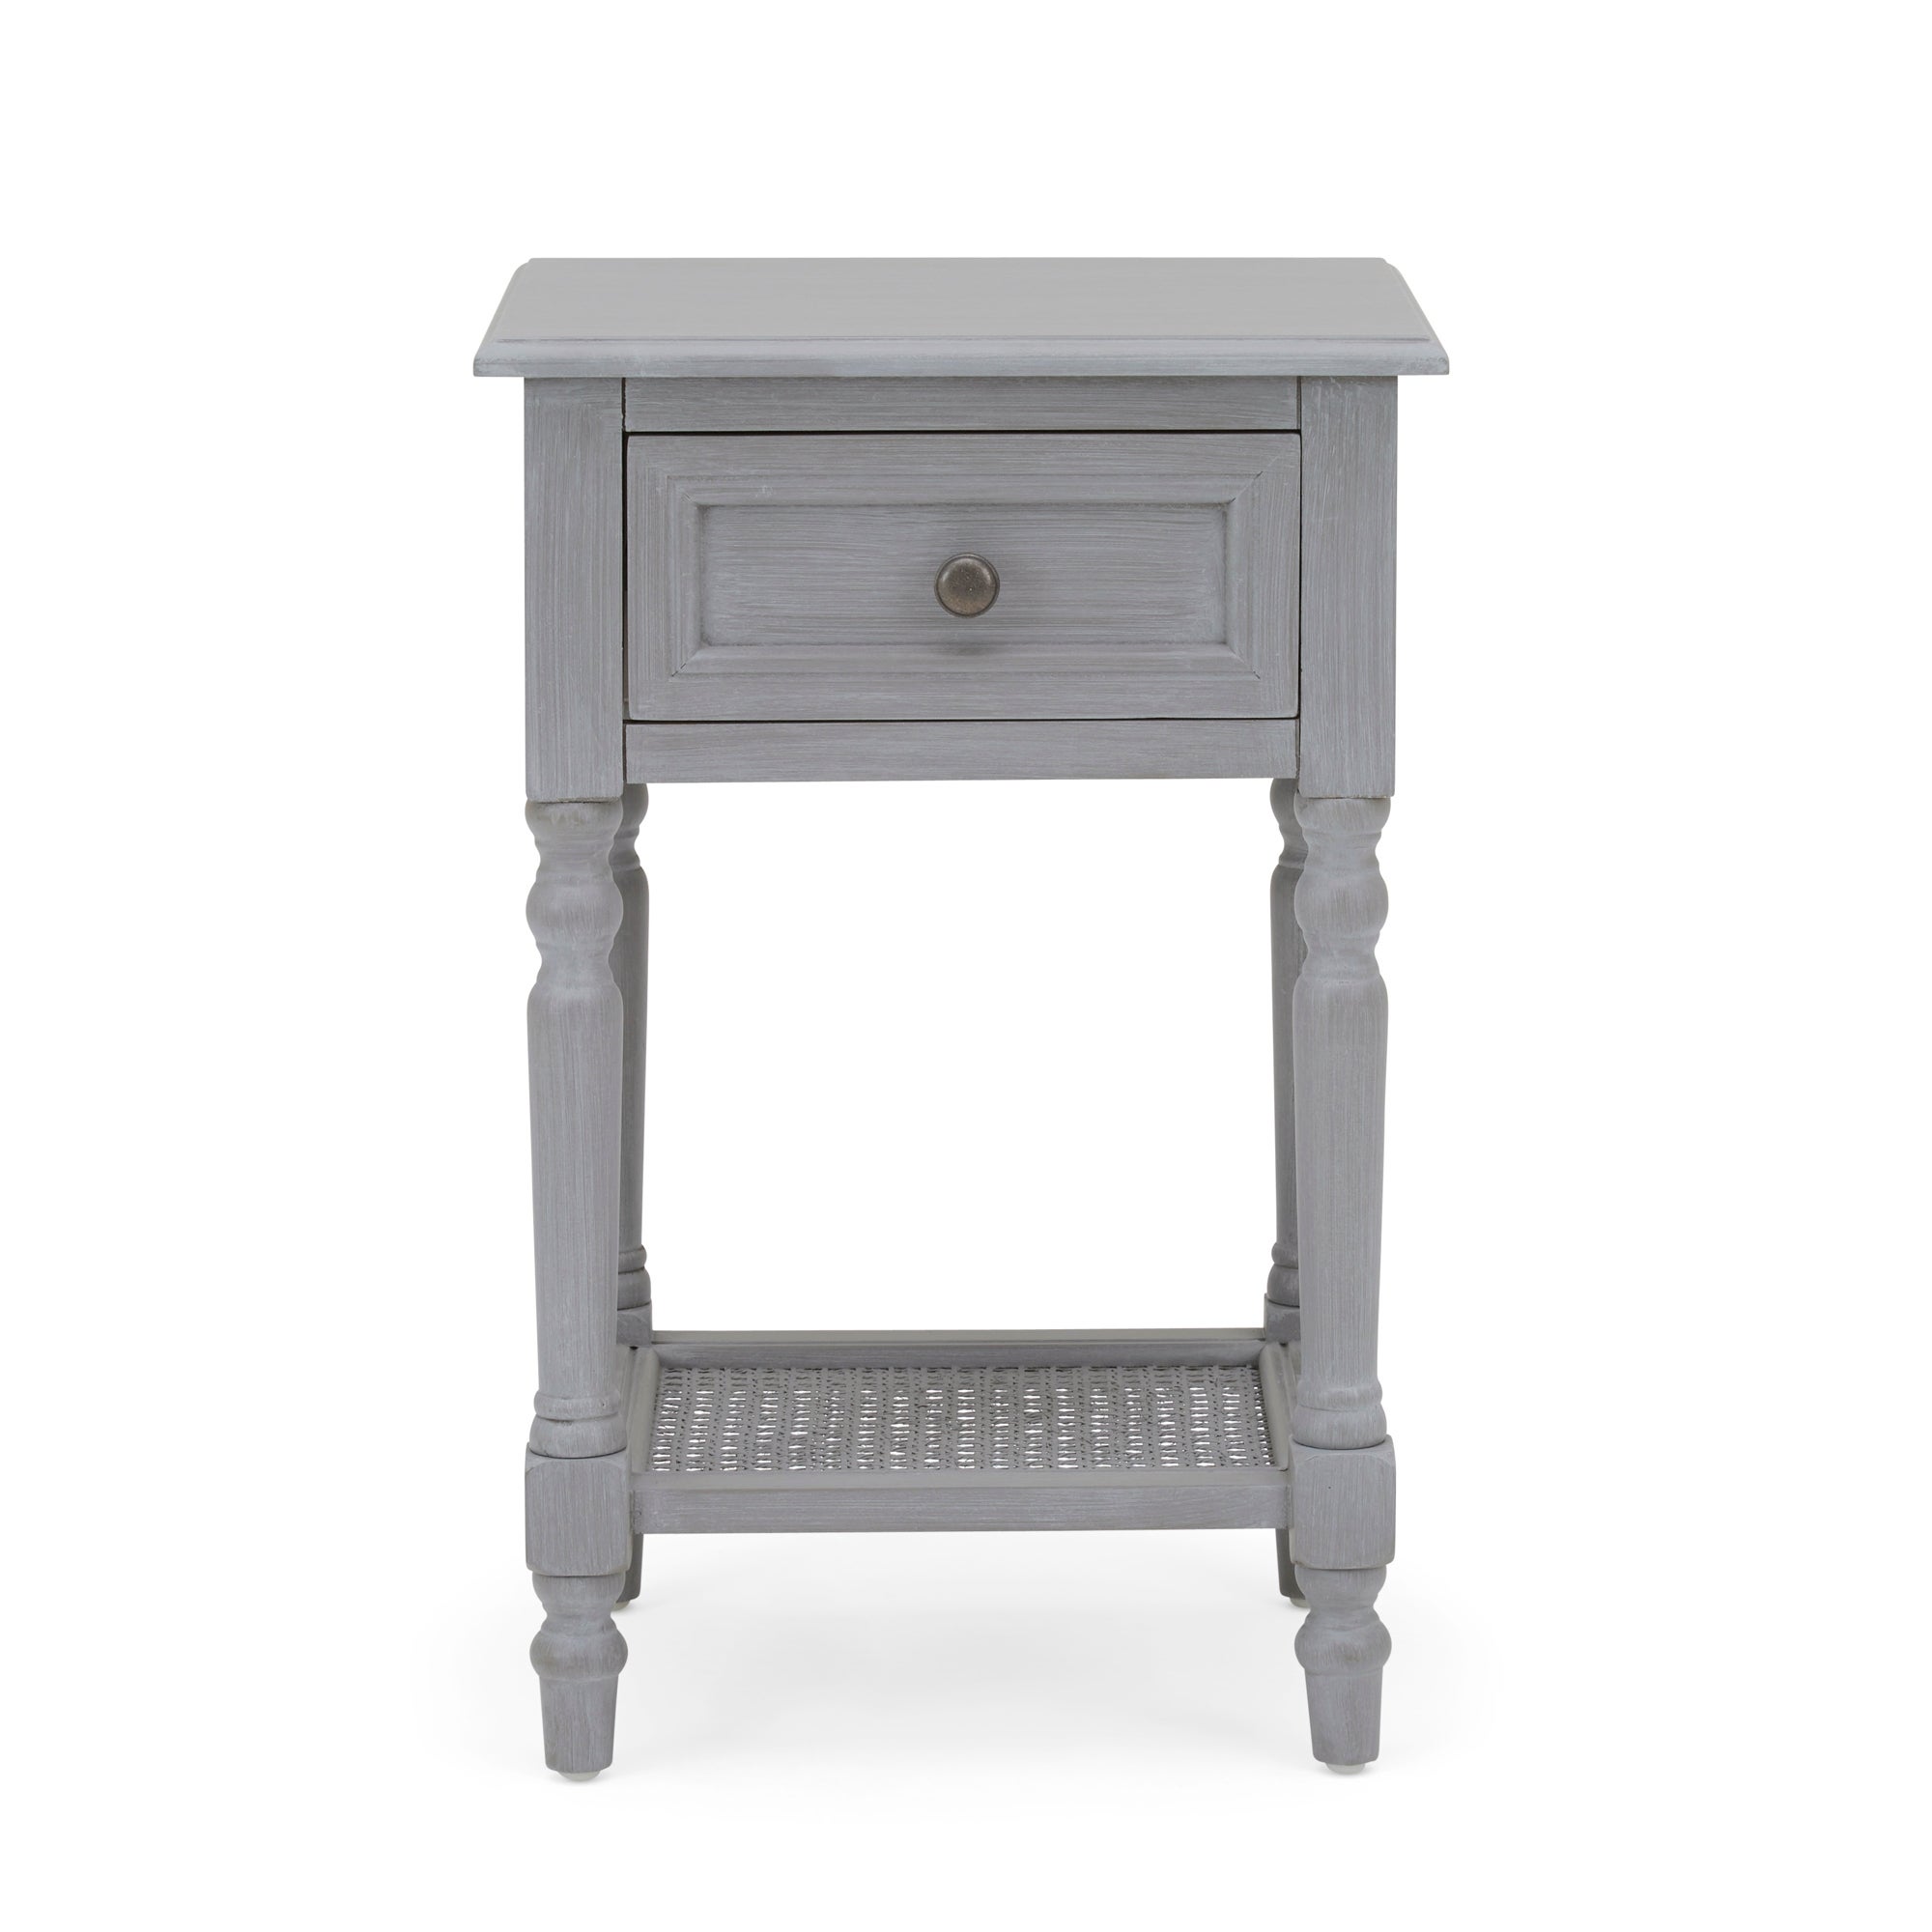 Lucy Cane 1 Drawer Bedside Table